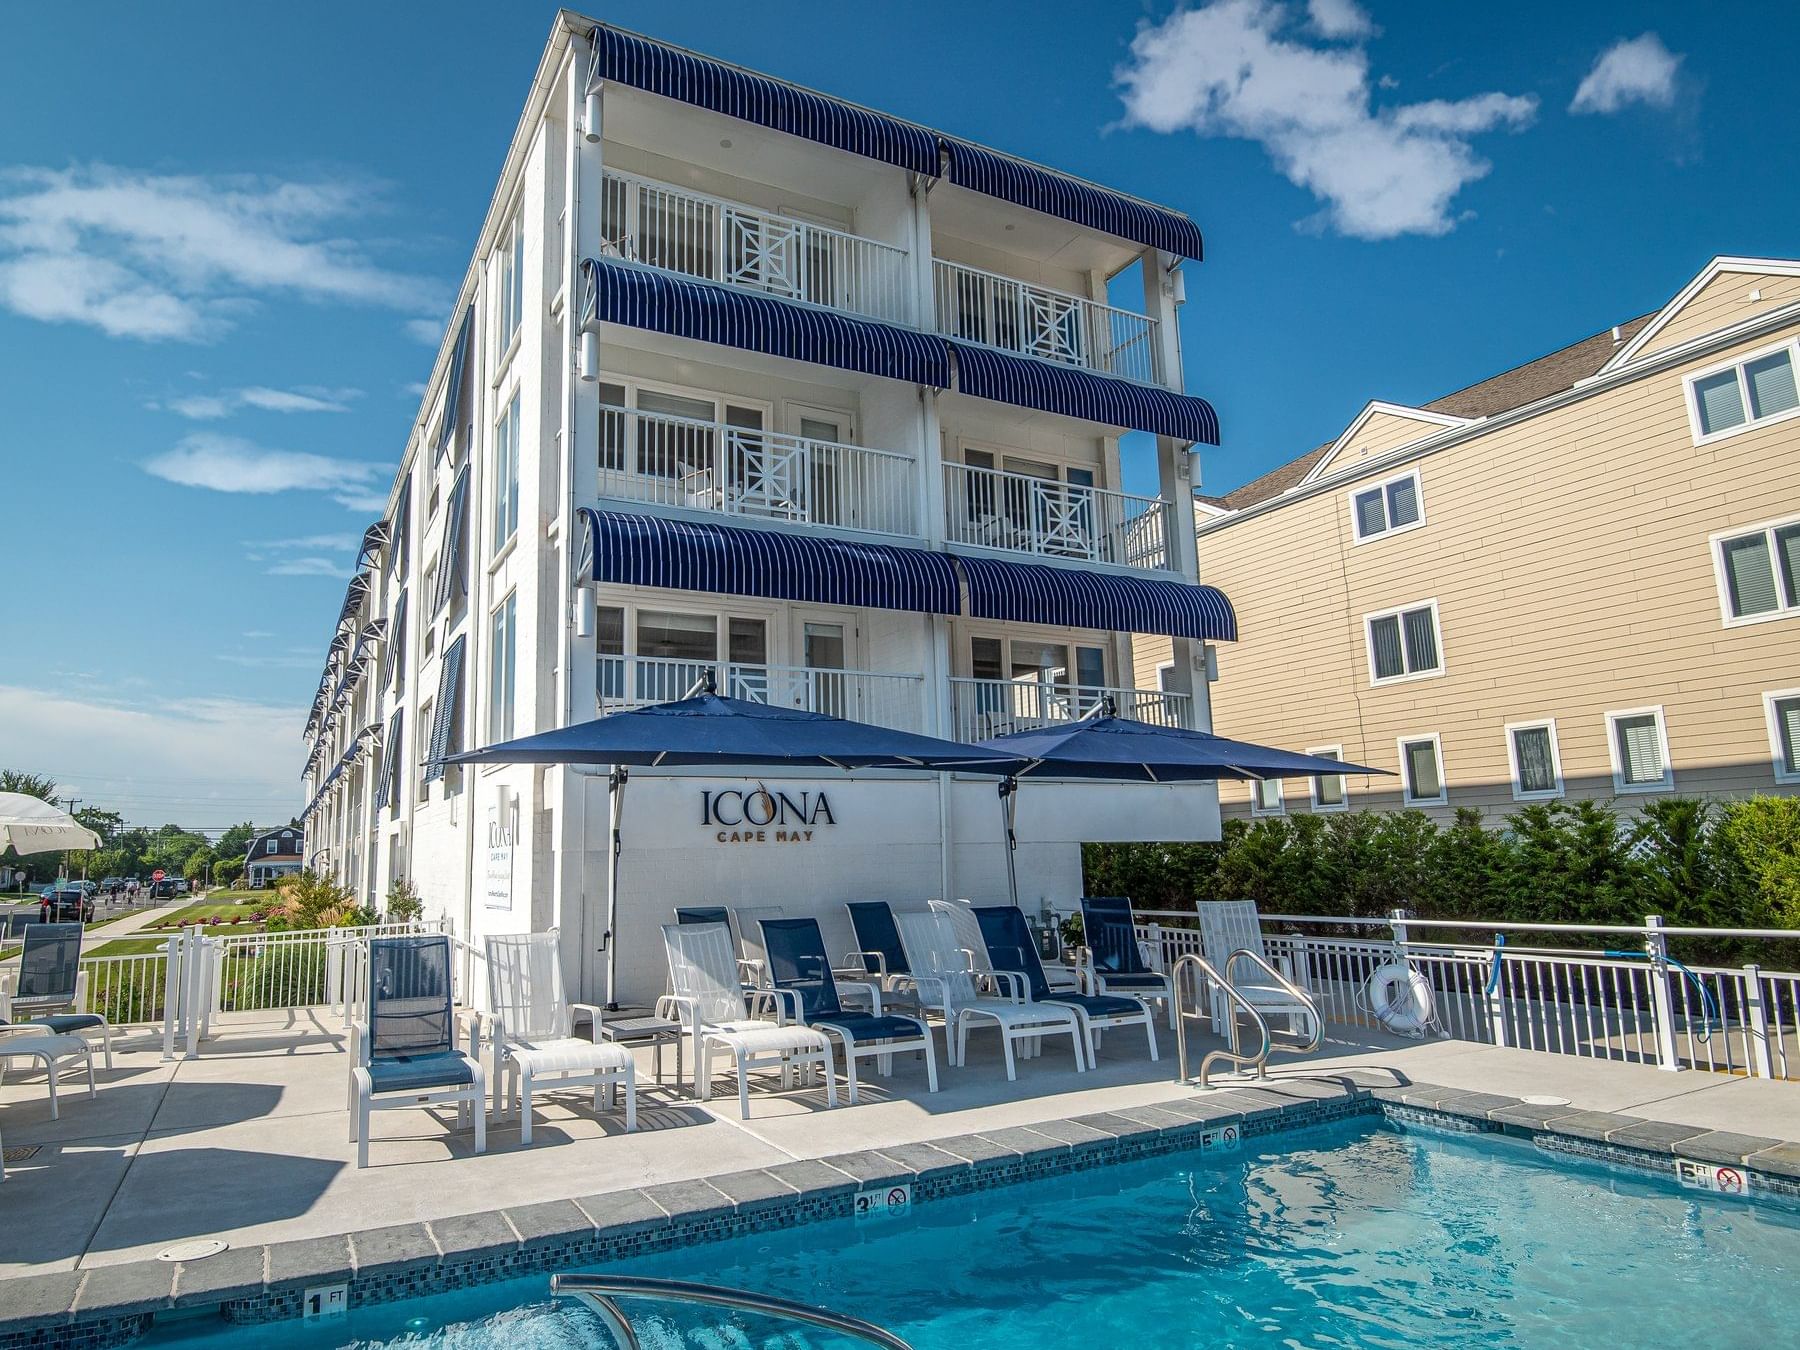 The exterior view of the ICONA Cape May outdoor pool area